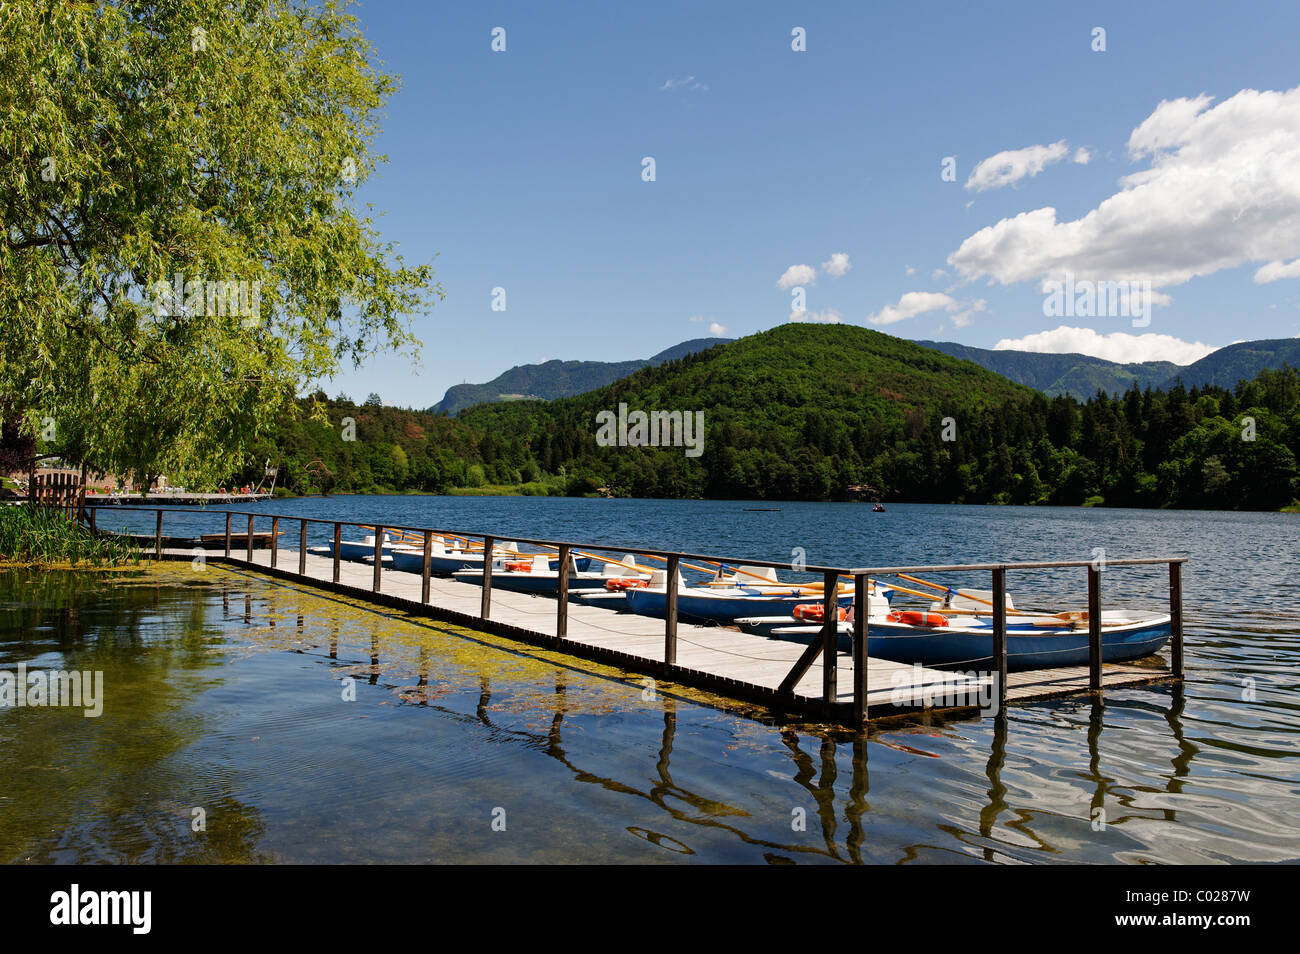 Rantal boat station at the beach Lido, Montiggler See, on the Weinstrasse wine route, Oltradige, Southern Tyrol, Italy, Europe Stock Photo